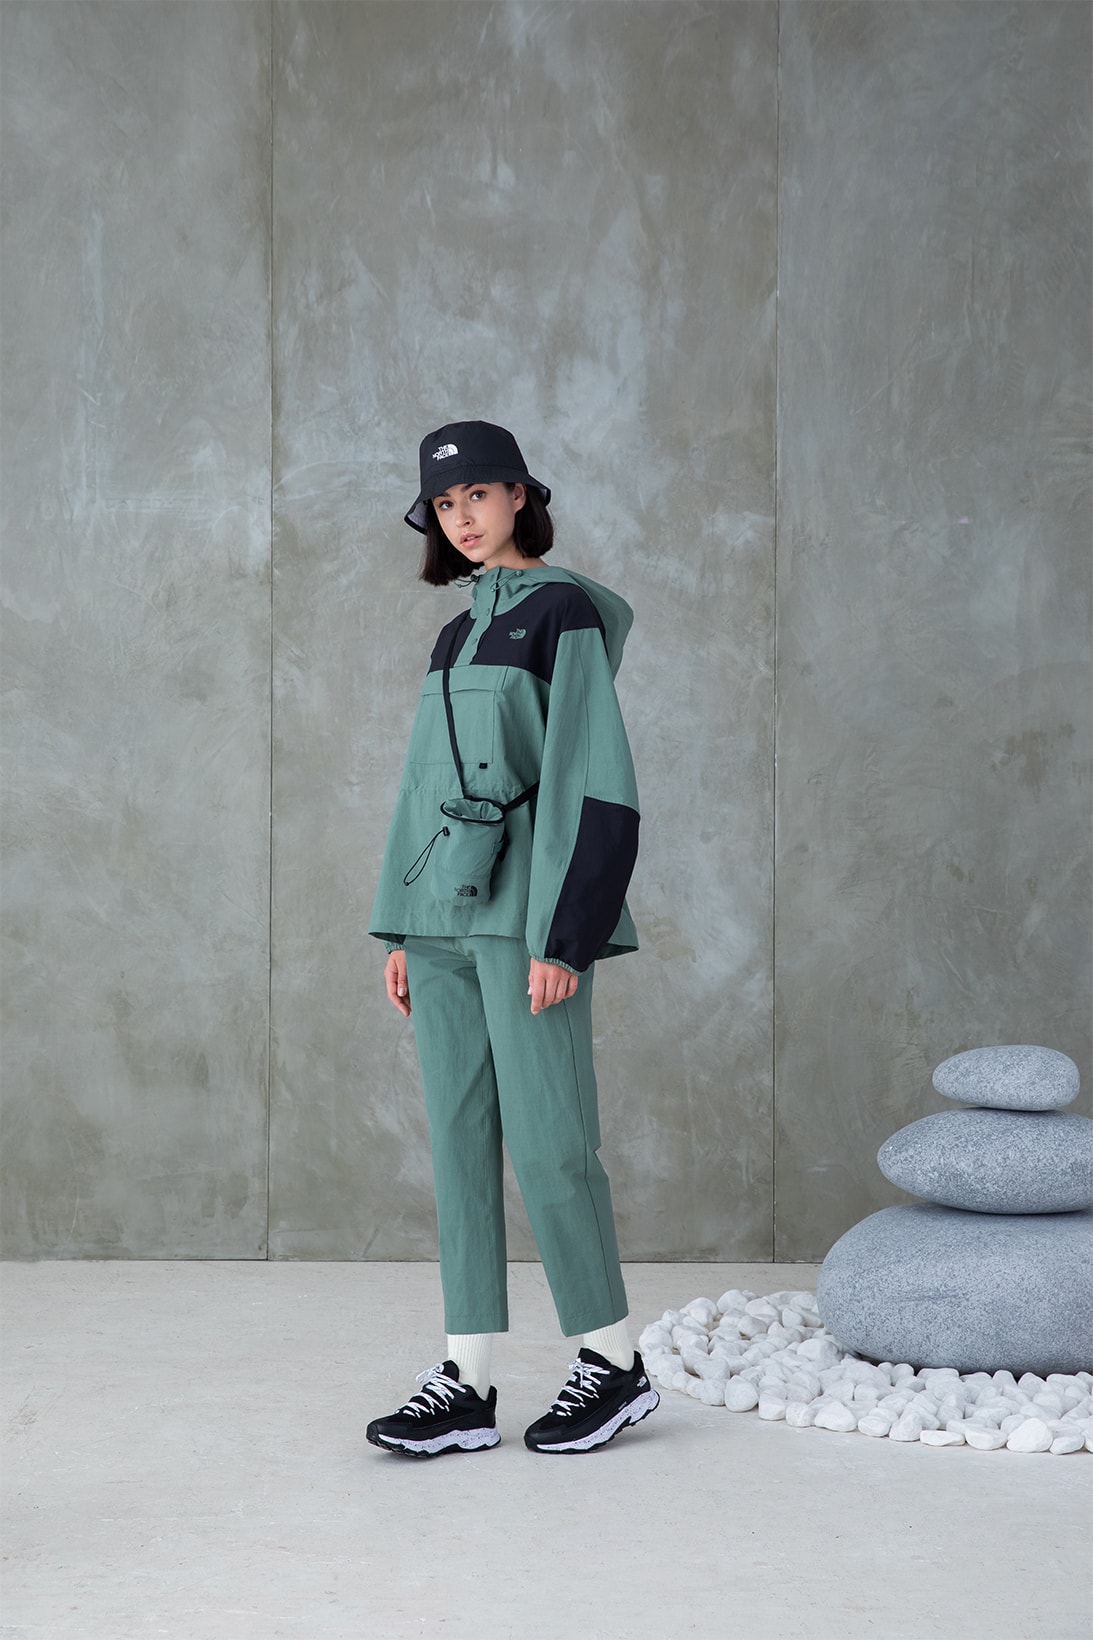 The North Face Urban Exploration Elegance Collection Fall Winter 2021 FW21 Outdoor Clothing Jacket Outerwear Pants Bag Bucket Hat